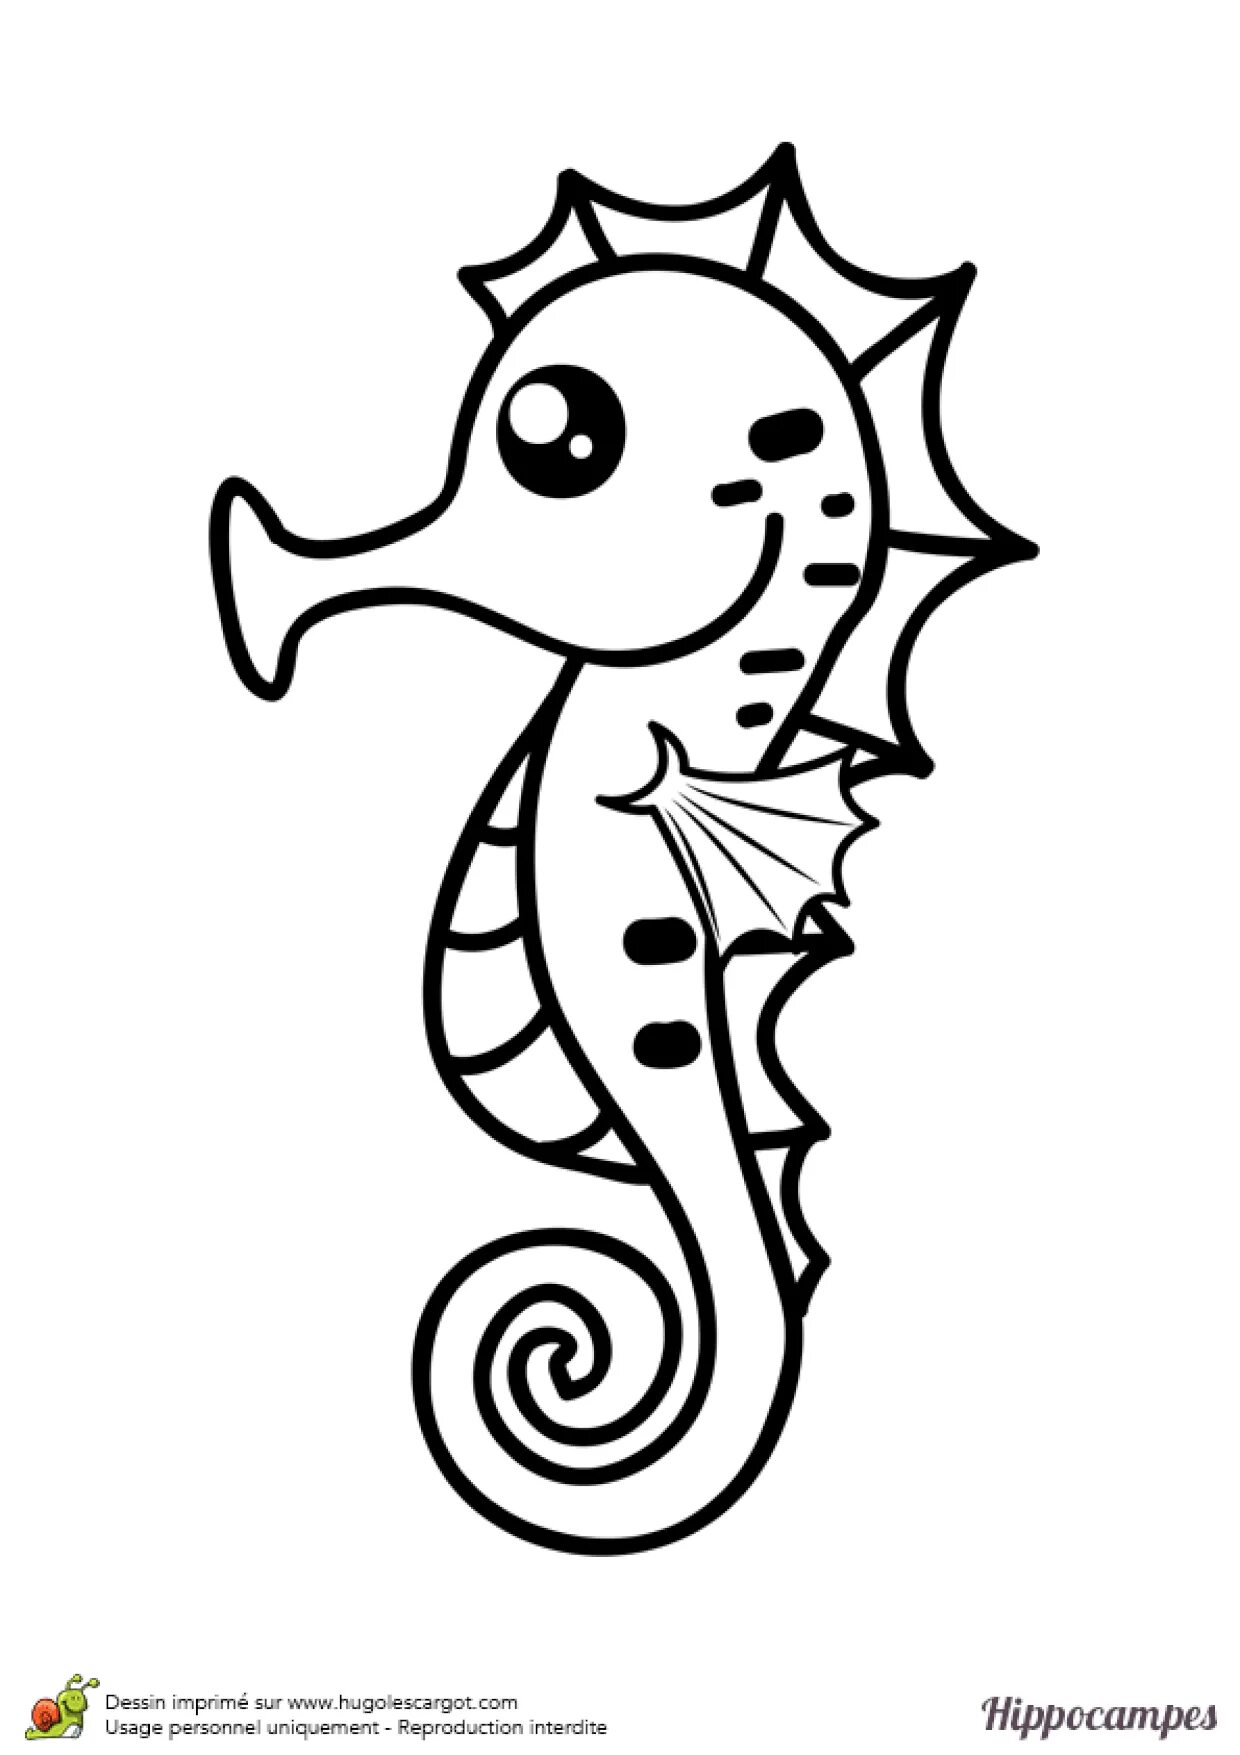 Sunny seahorse coloring book for kids